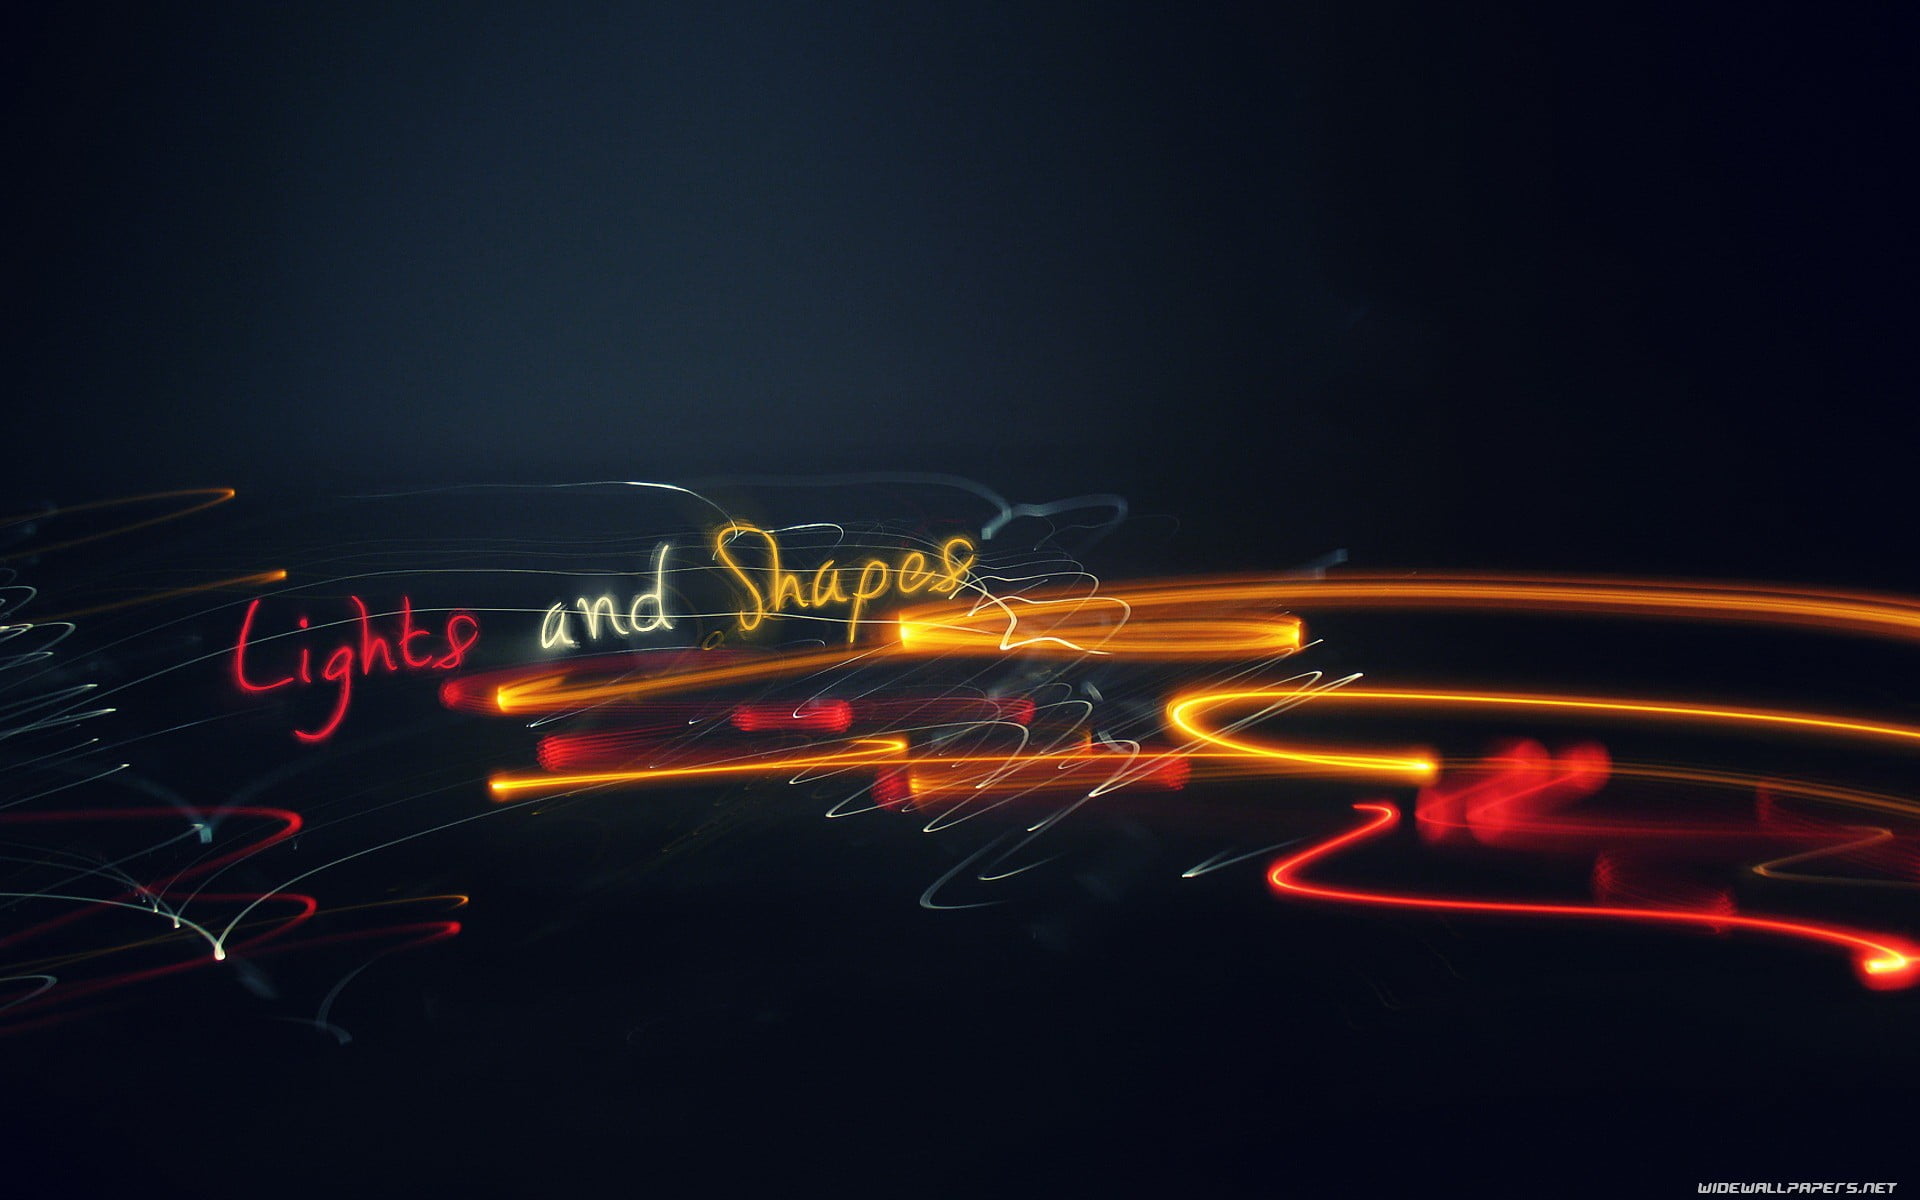 Lights and Shapes digital art, light painting, streaks, typography